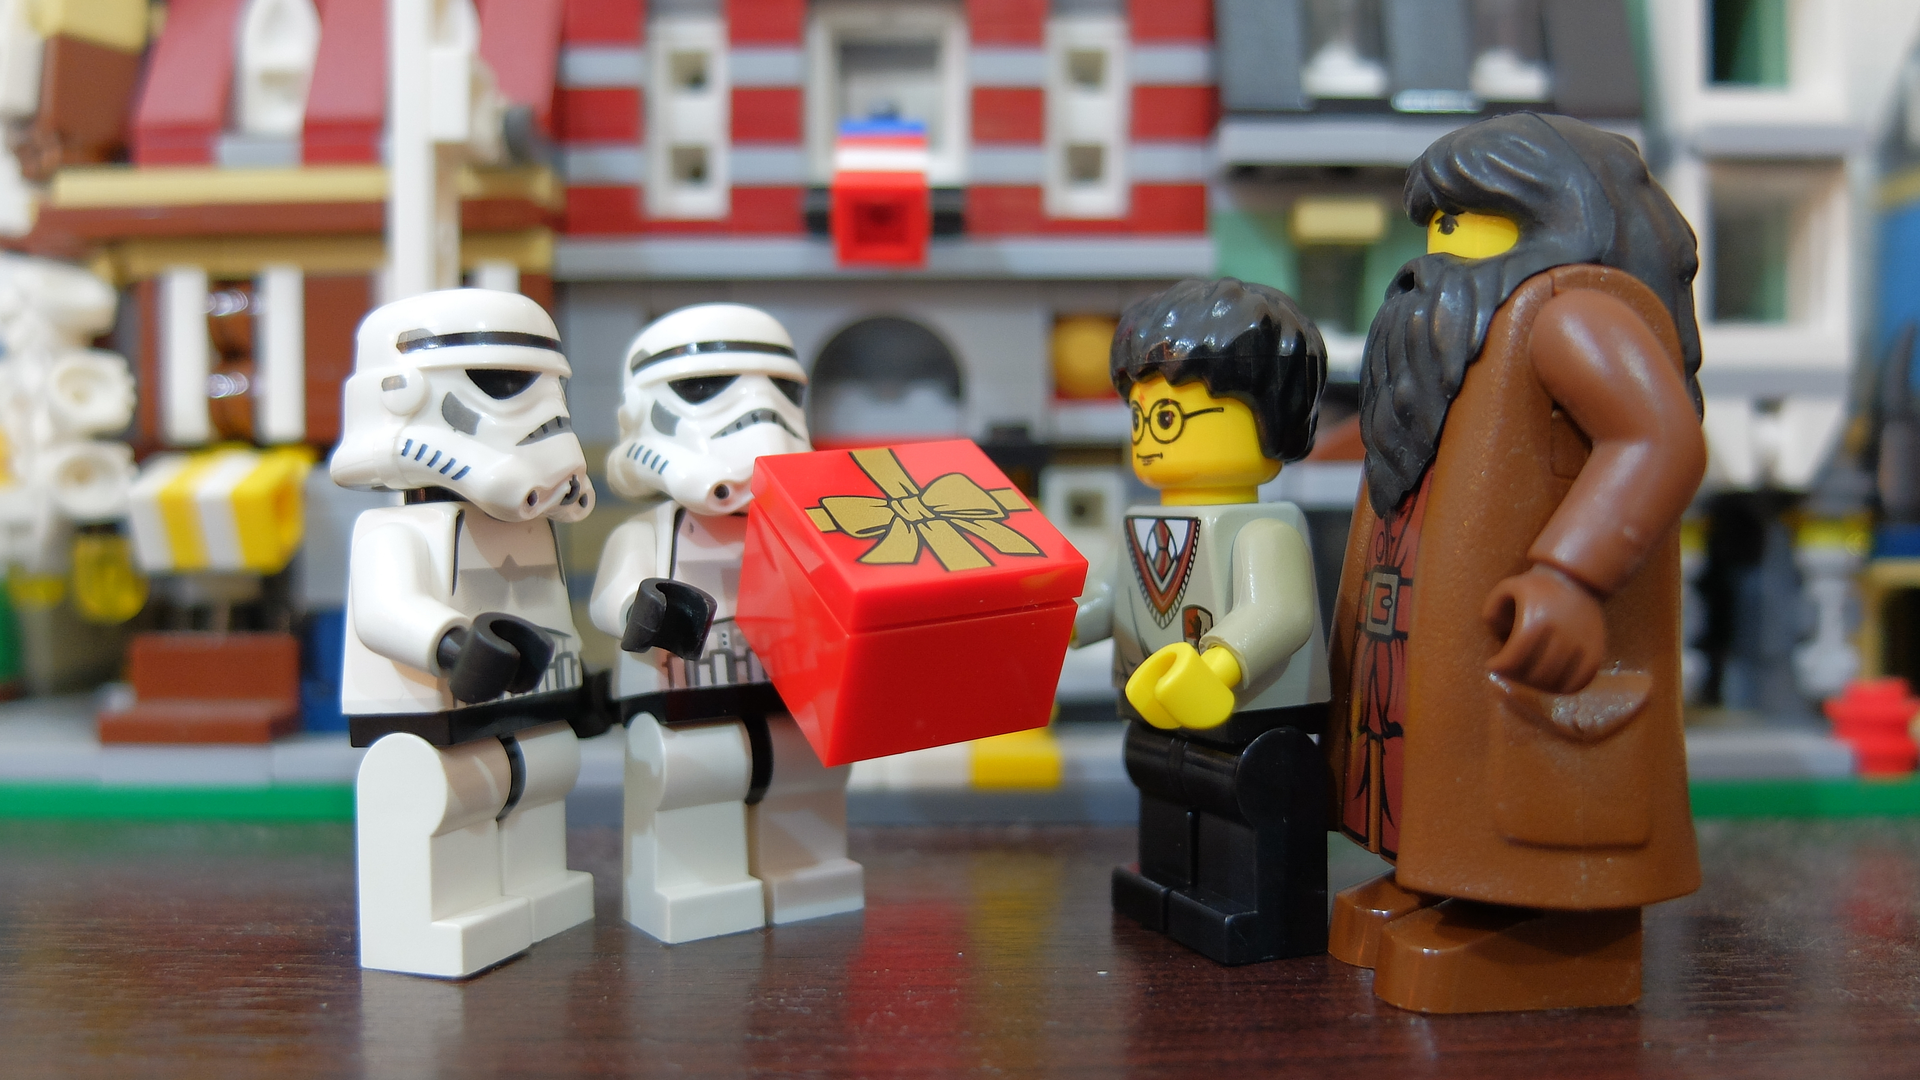 Lego Stormtroopers giving present to Harry Potter for 20th anniversary of publishing Harry Potter book.